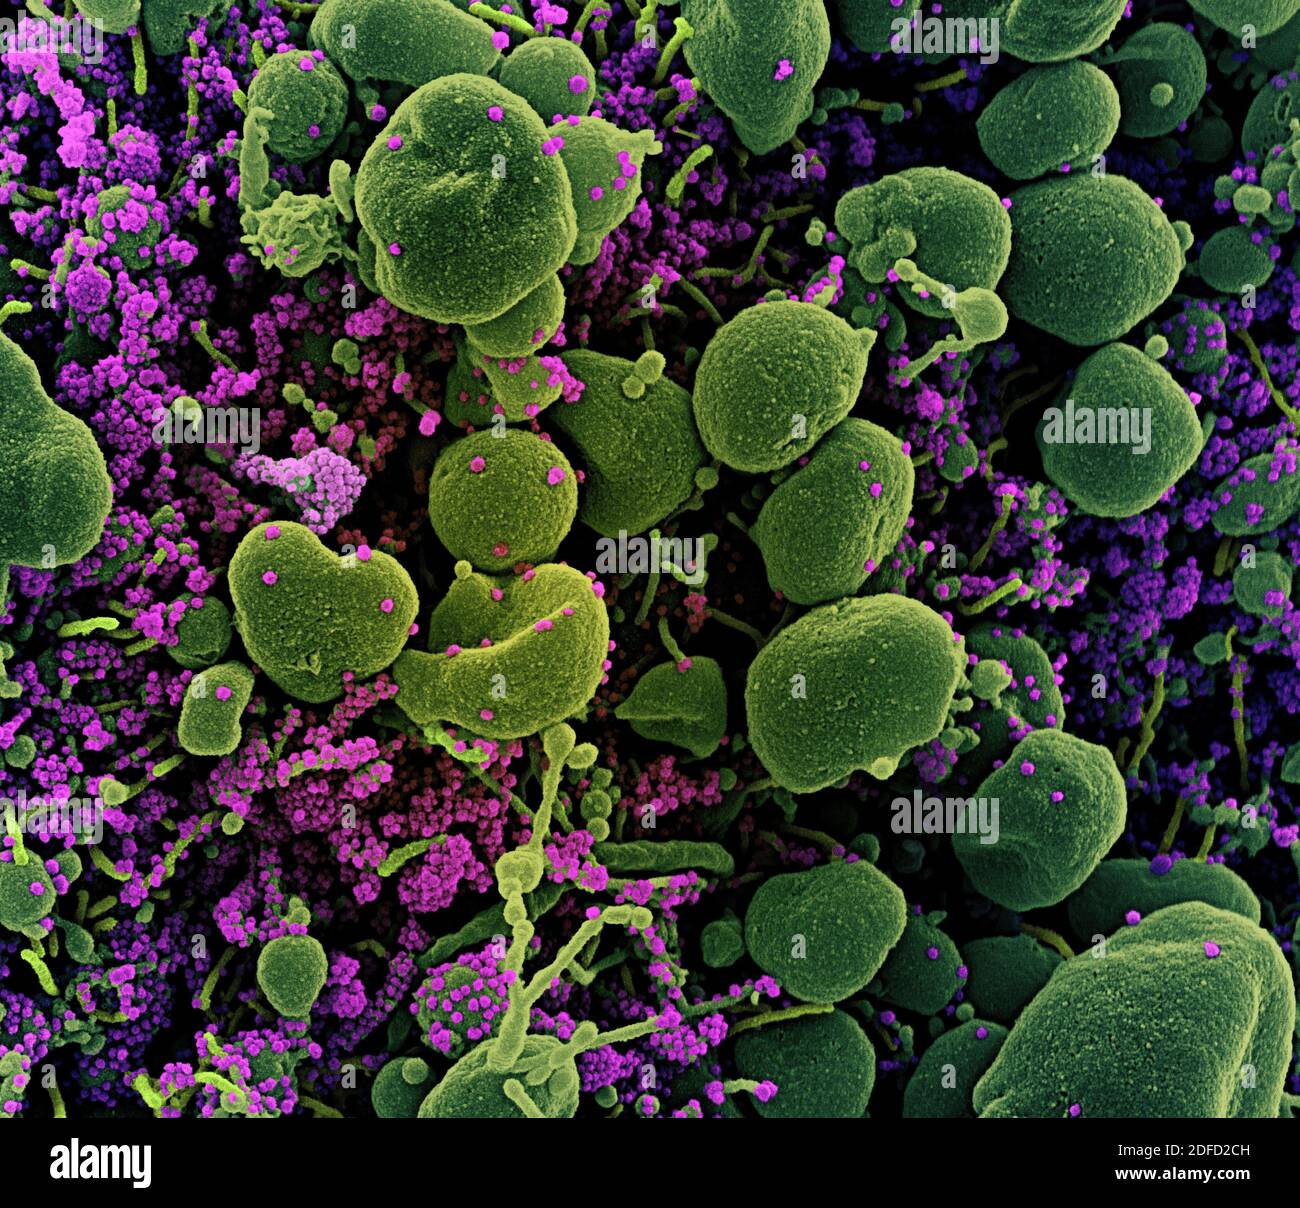 Colorized scanning electron micrograph of an apoptotic cell (green ...